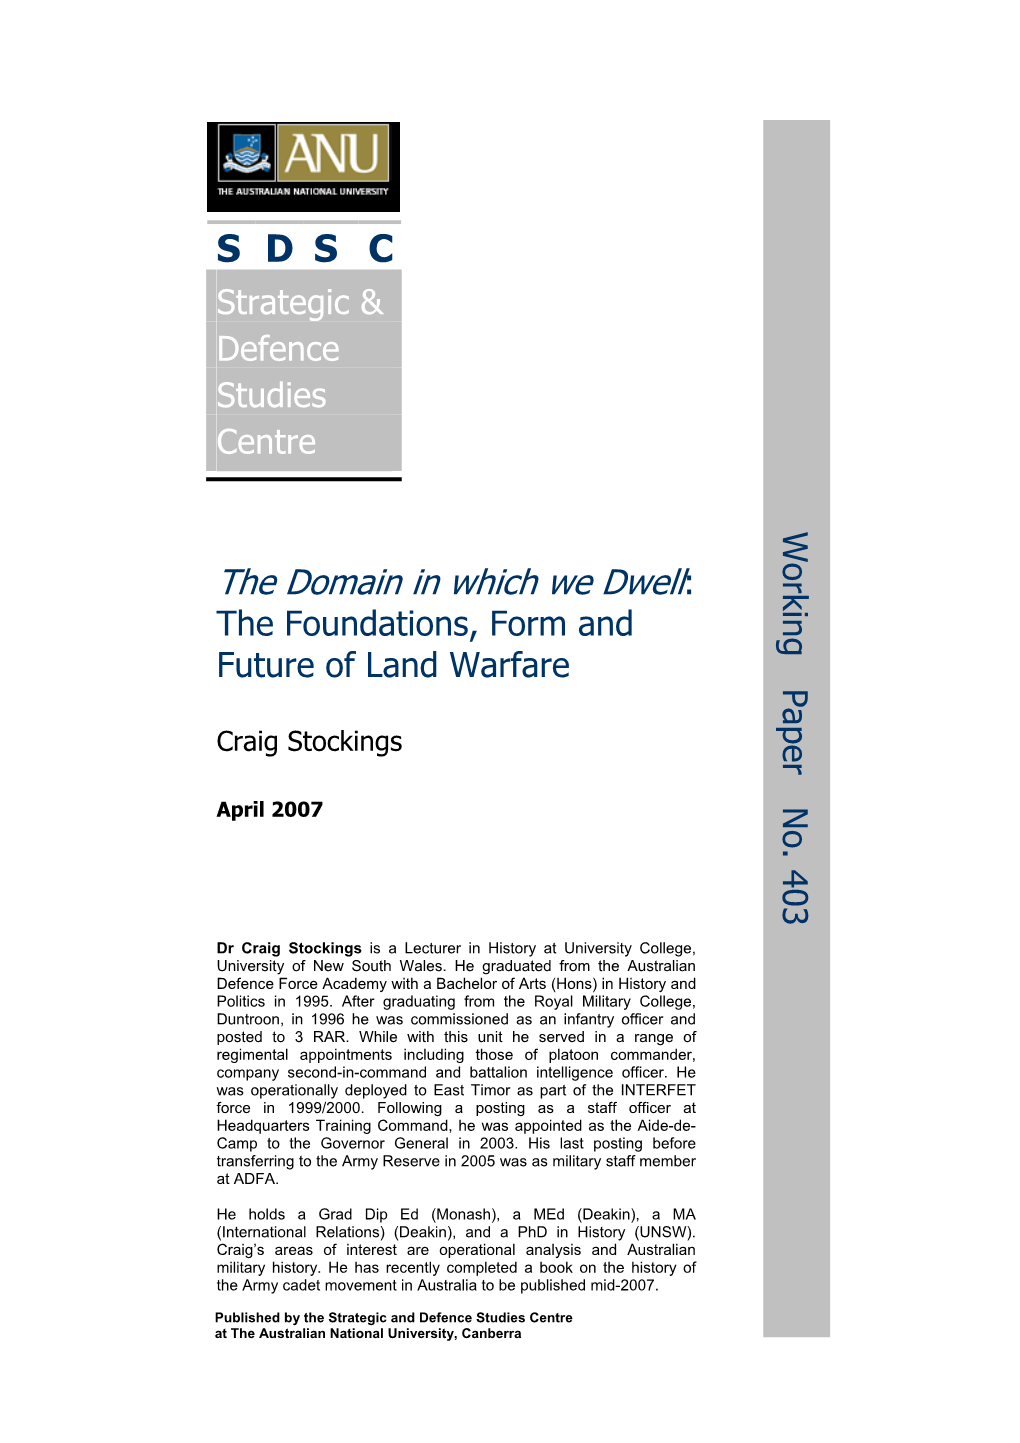 The Domain in Which We Dwell: the Foundations, Form and Future of Land Warfare